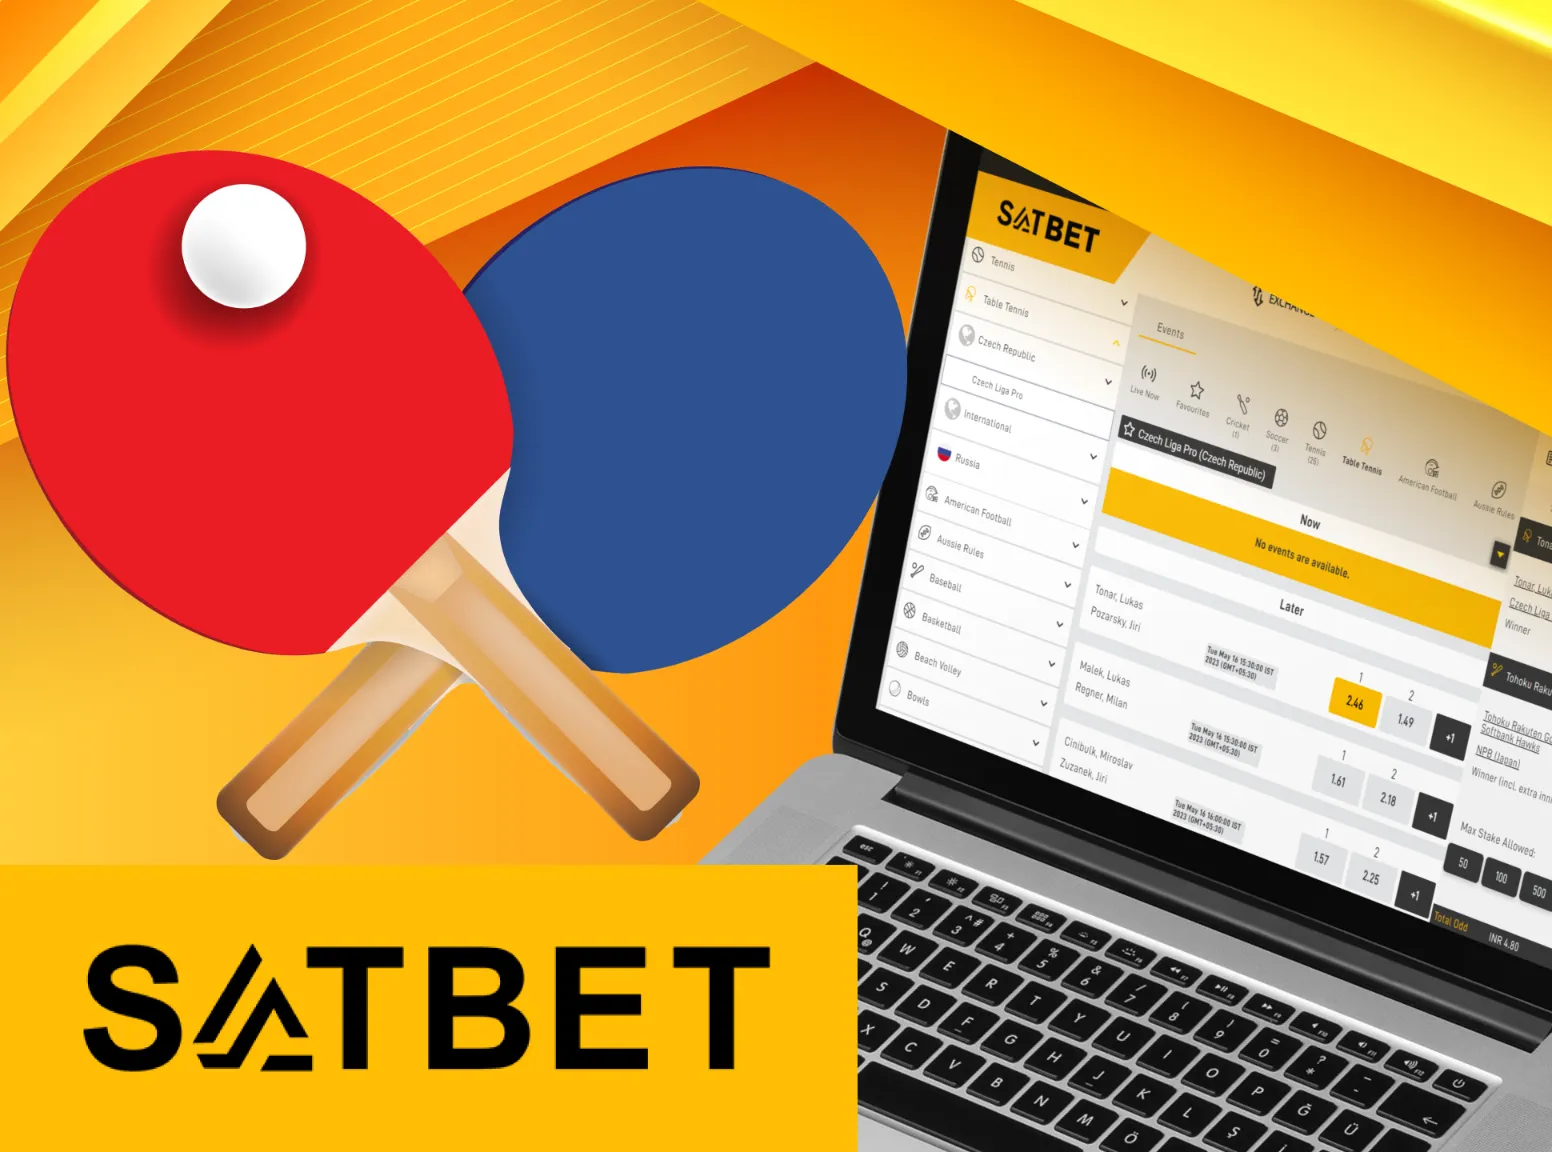 Bet on table tennis players at Satbet.